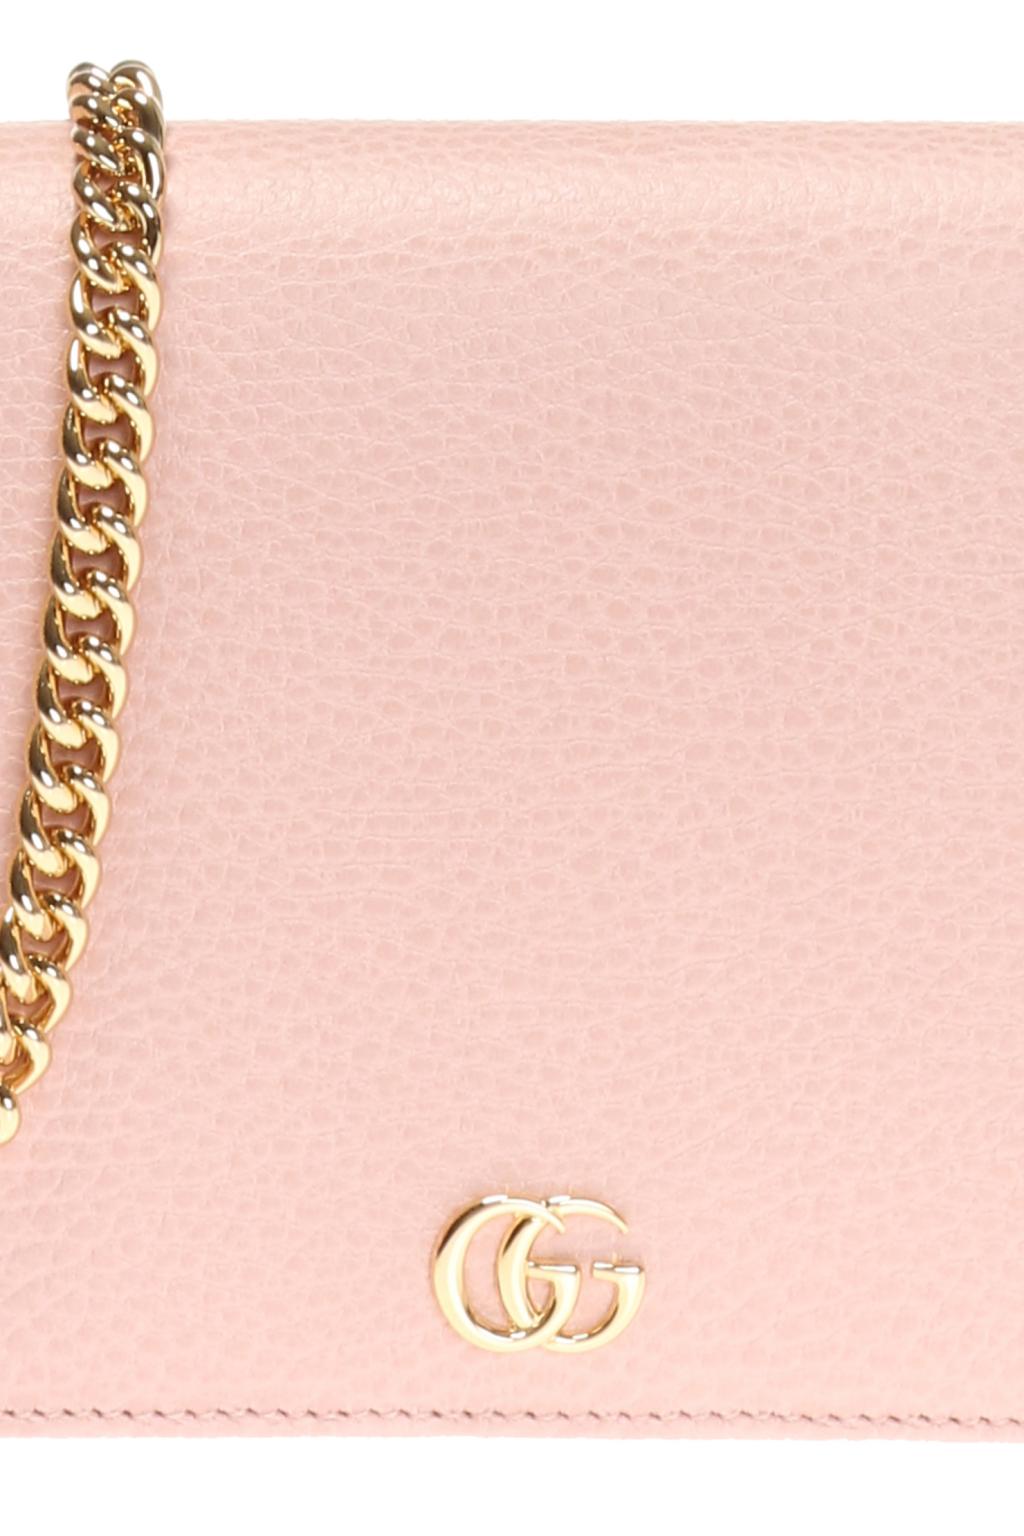 gucci marmont wallet on chain pink